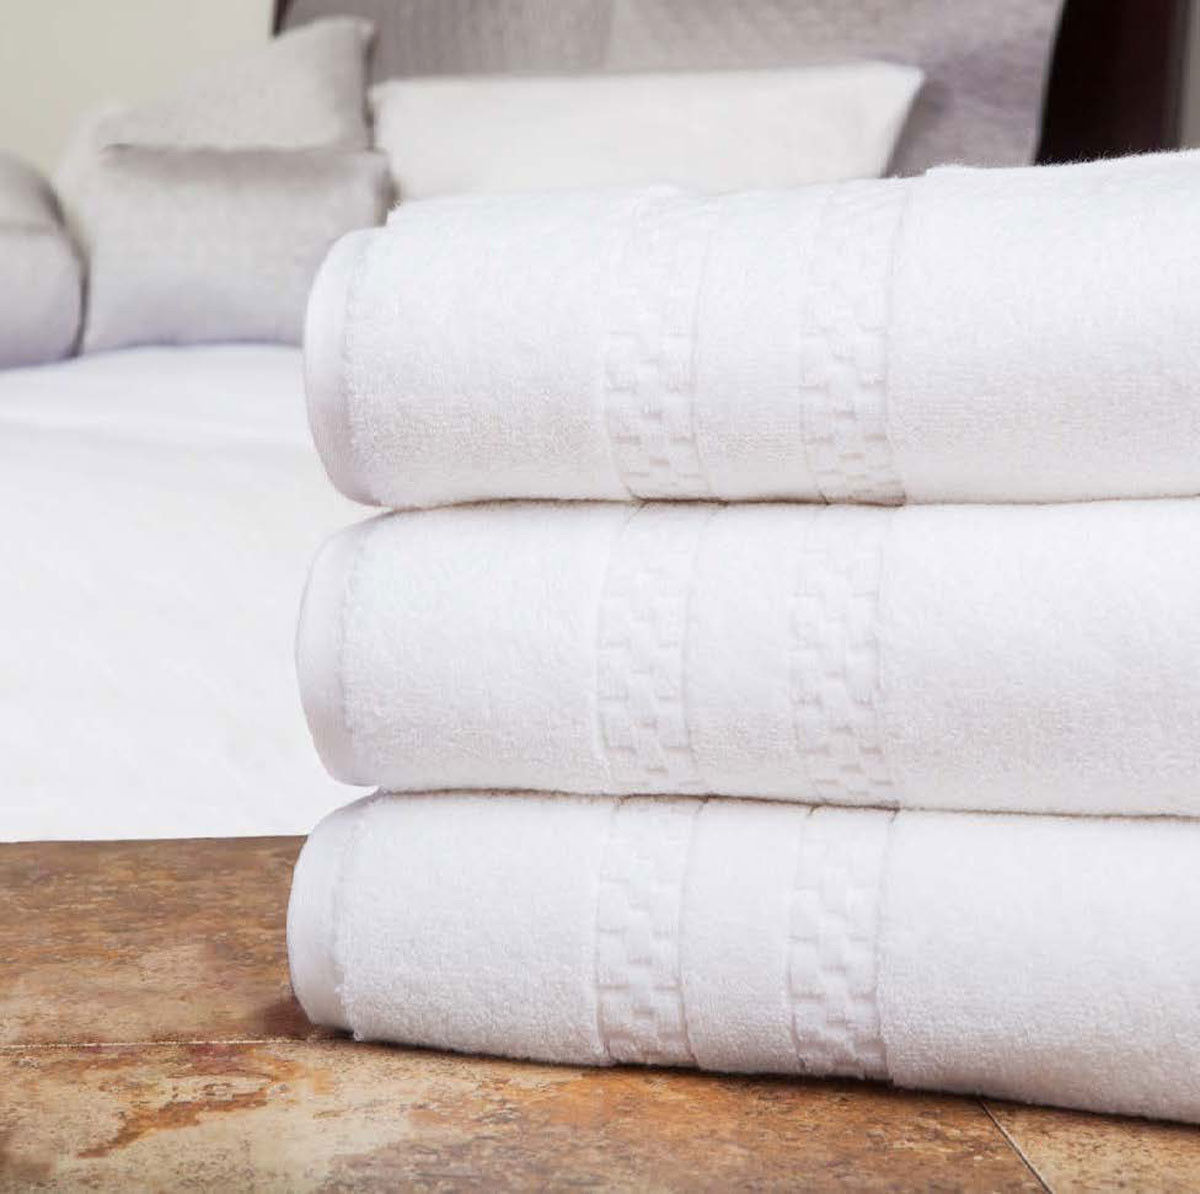 Are Villa di Borghese Sorrento Luxury Towel Collection thick towels?